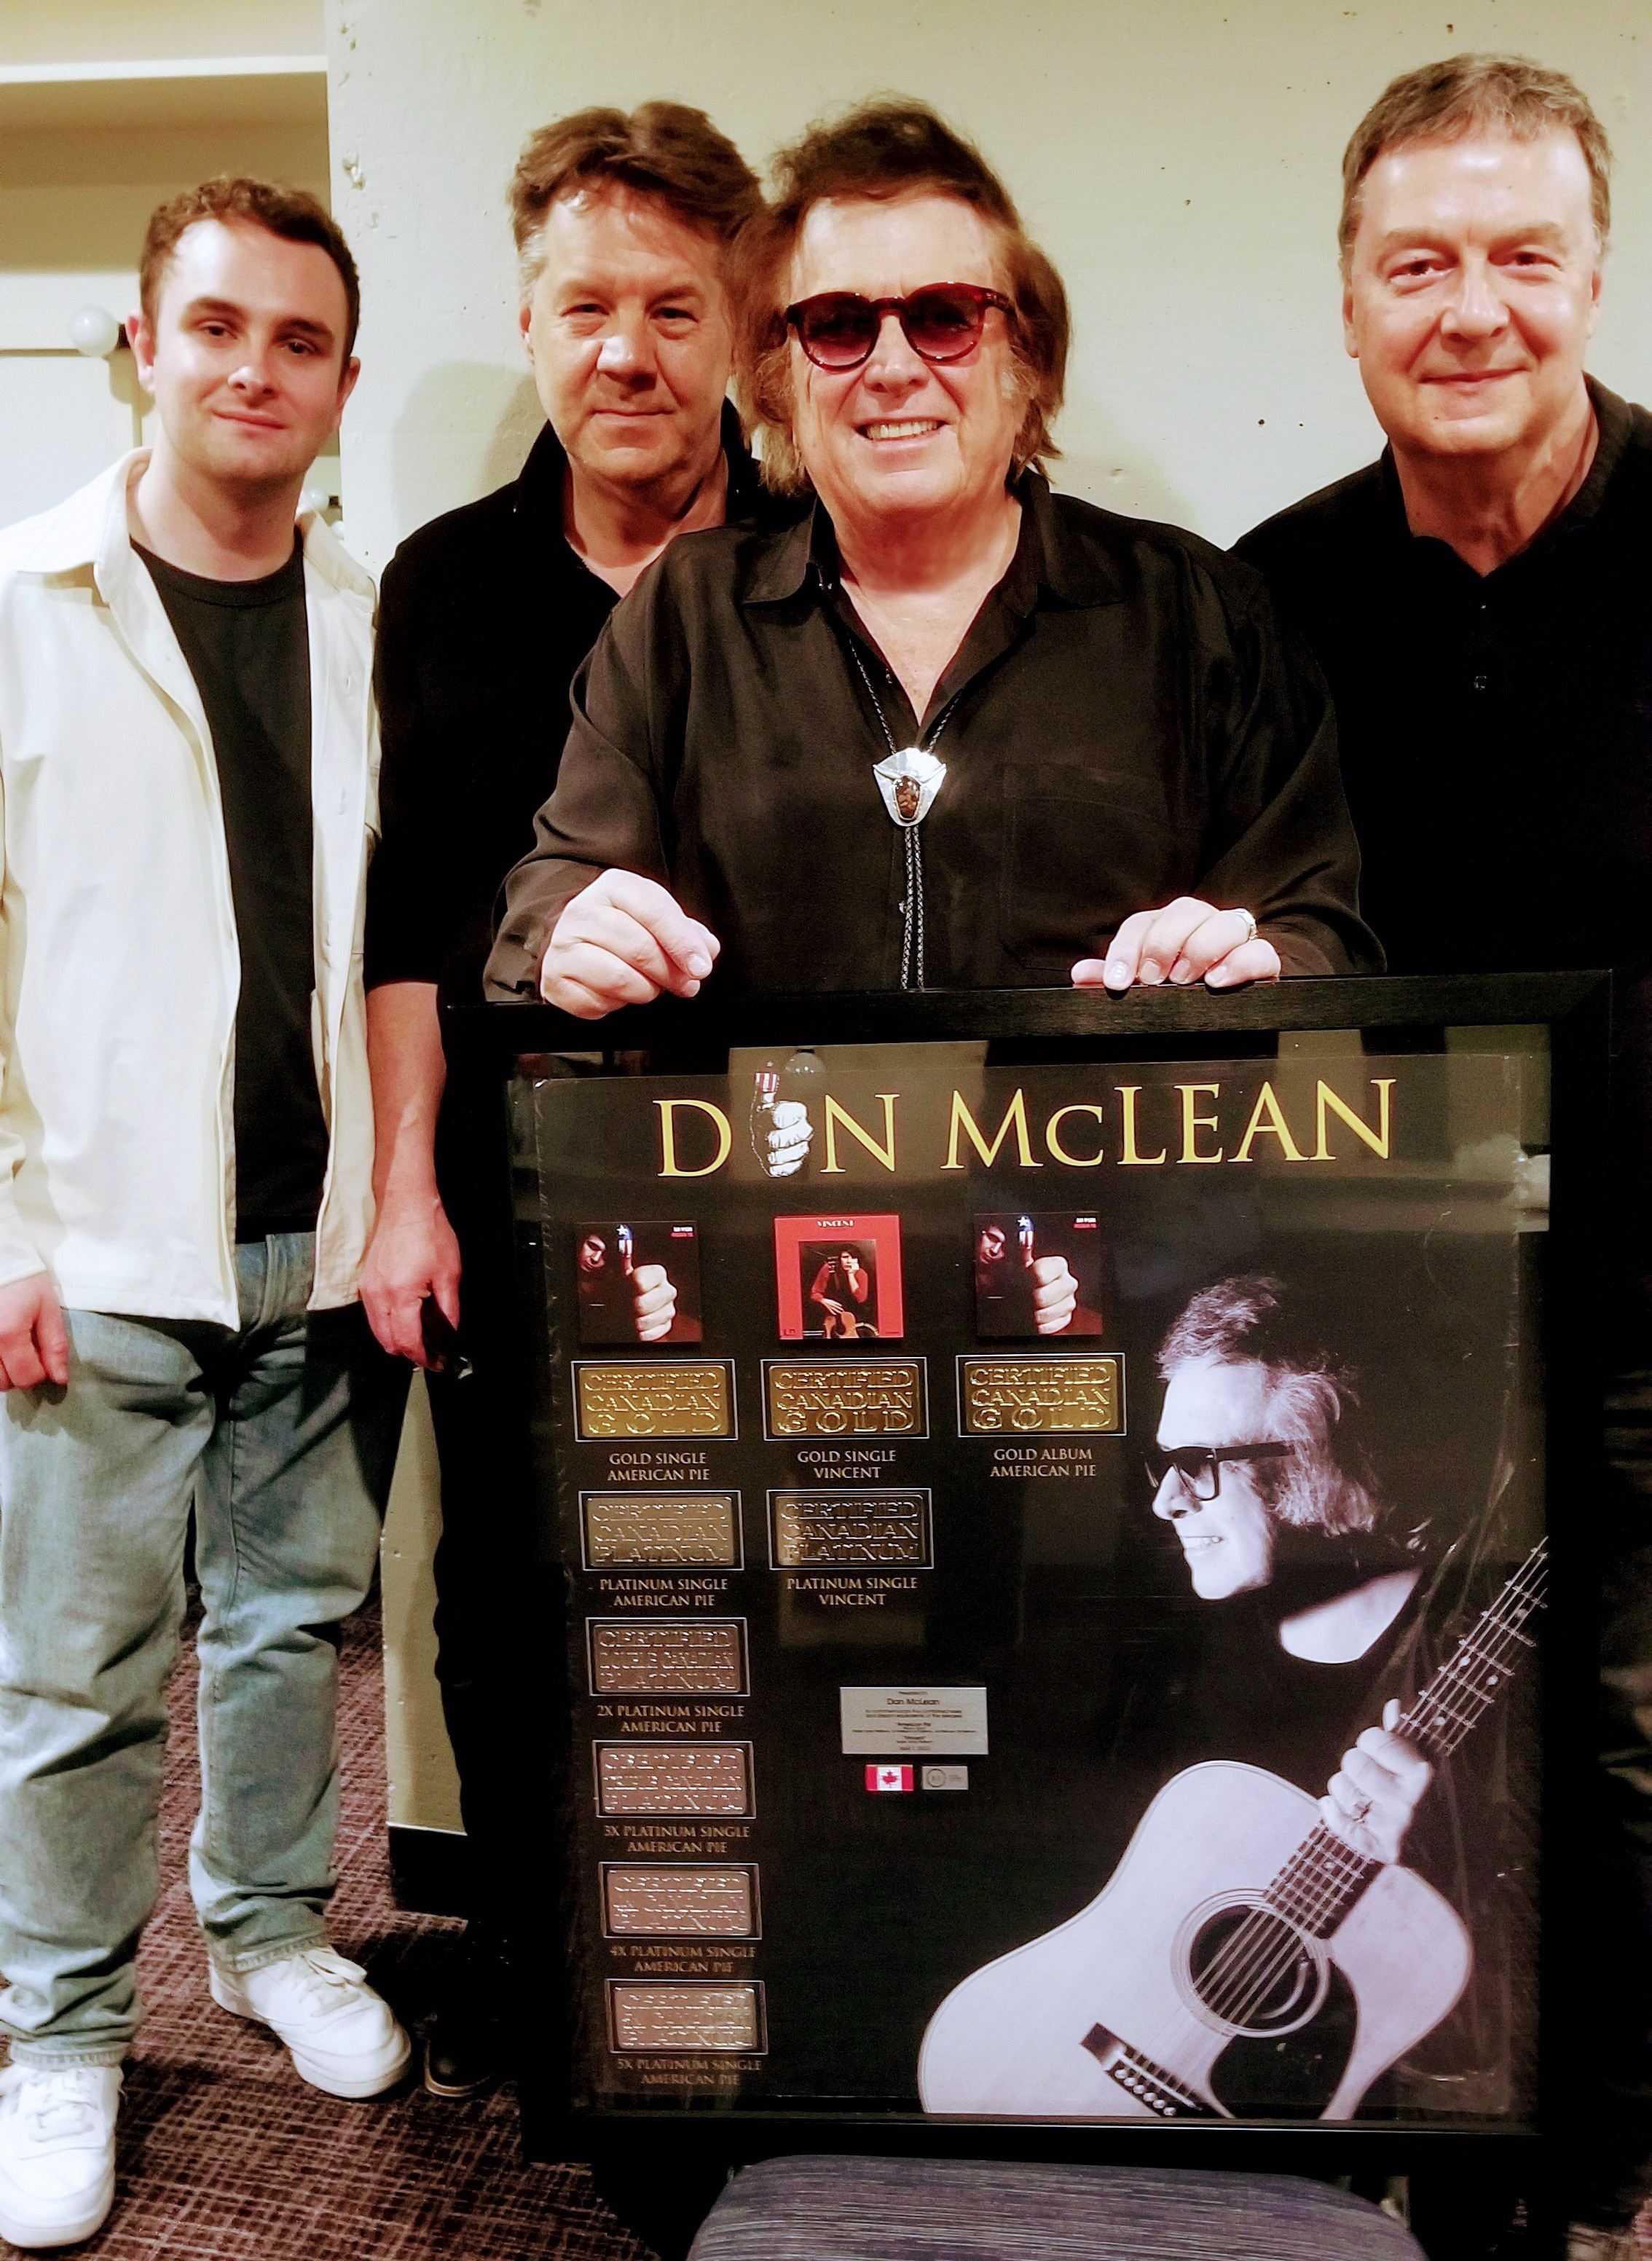 DON McLEAN AWARDED WITH MULTI-PLATINUM AWARD FOR "AMERICAN PIE" AND PLATINUM AWARD FOR "VINCENT" BY UNIVERSAL MUSIC CANADA